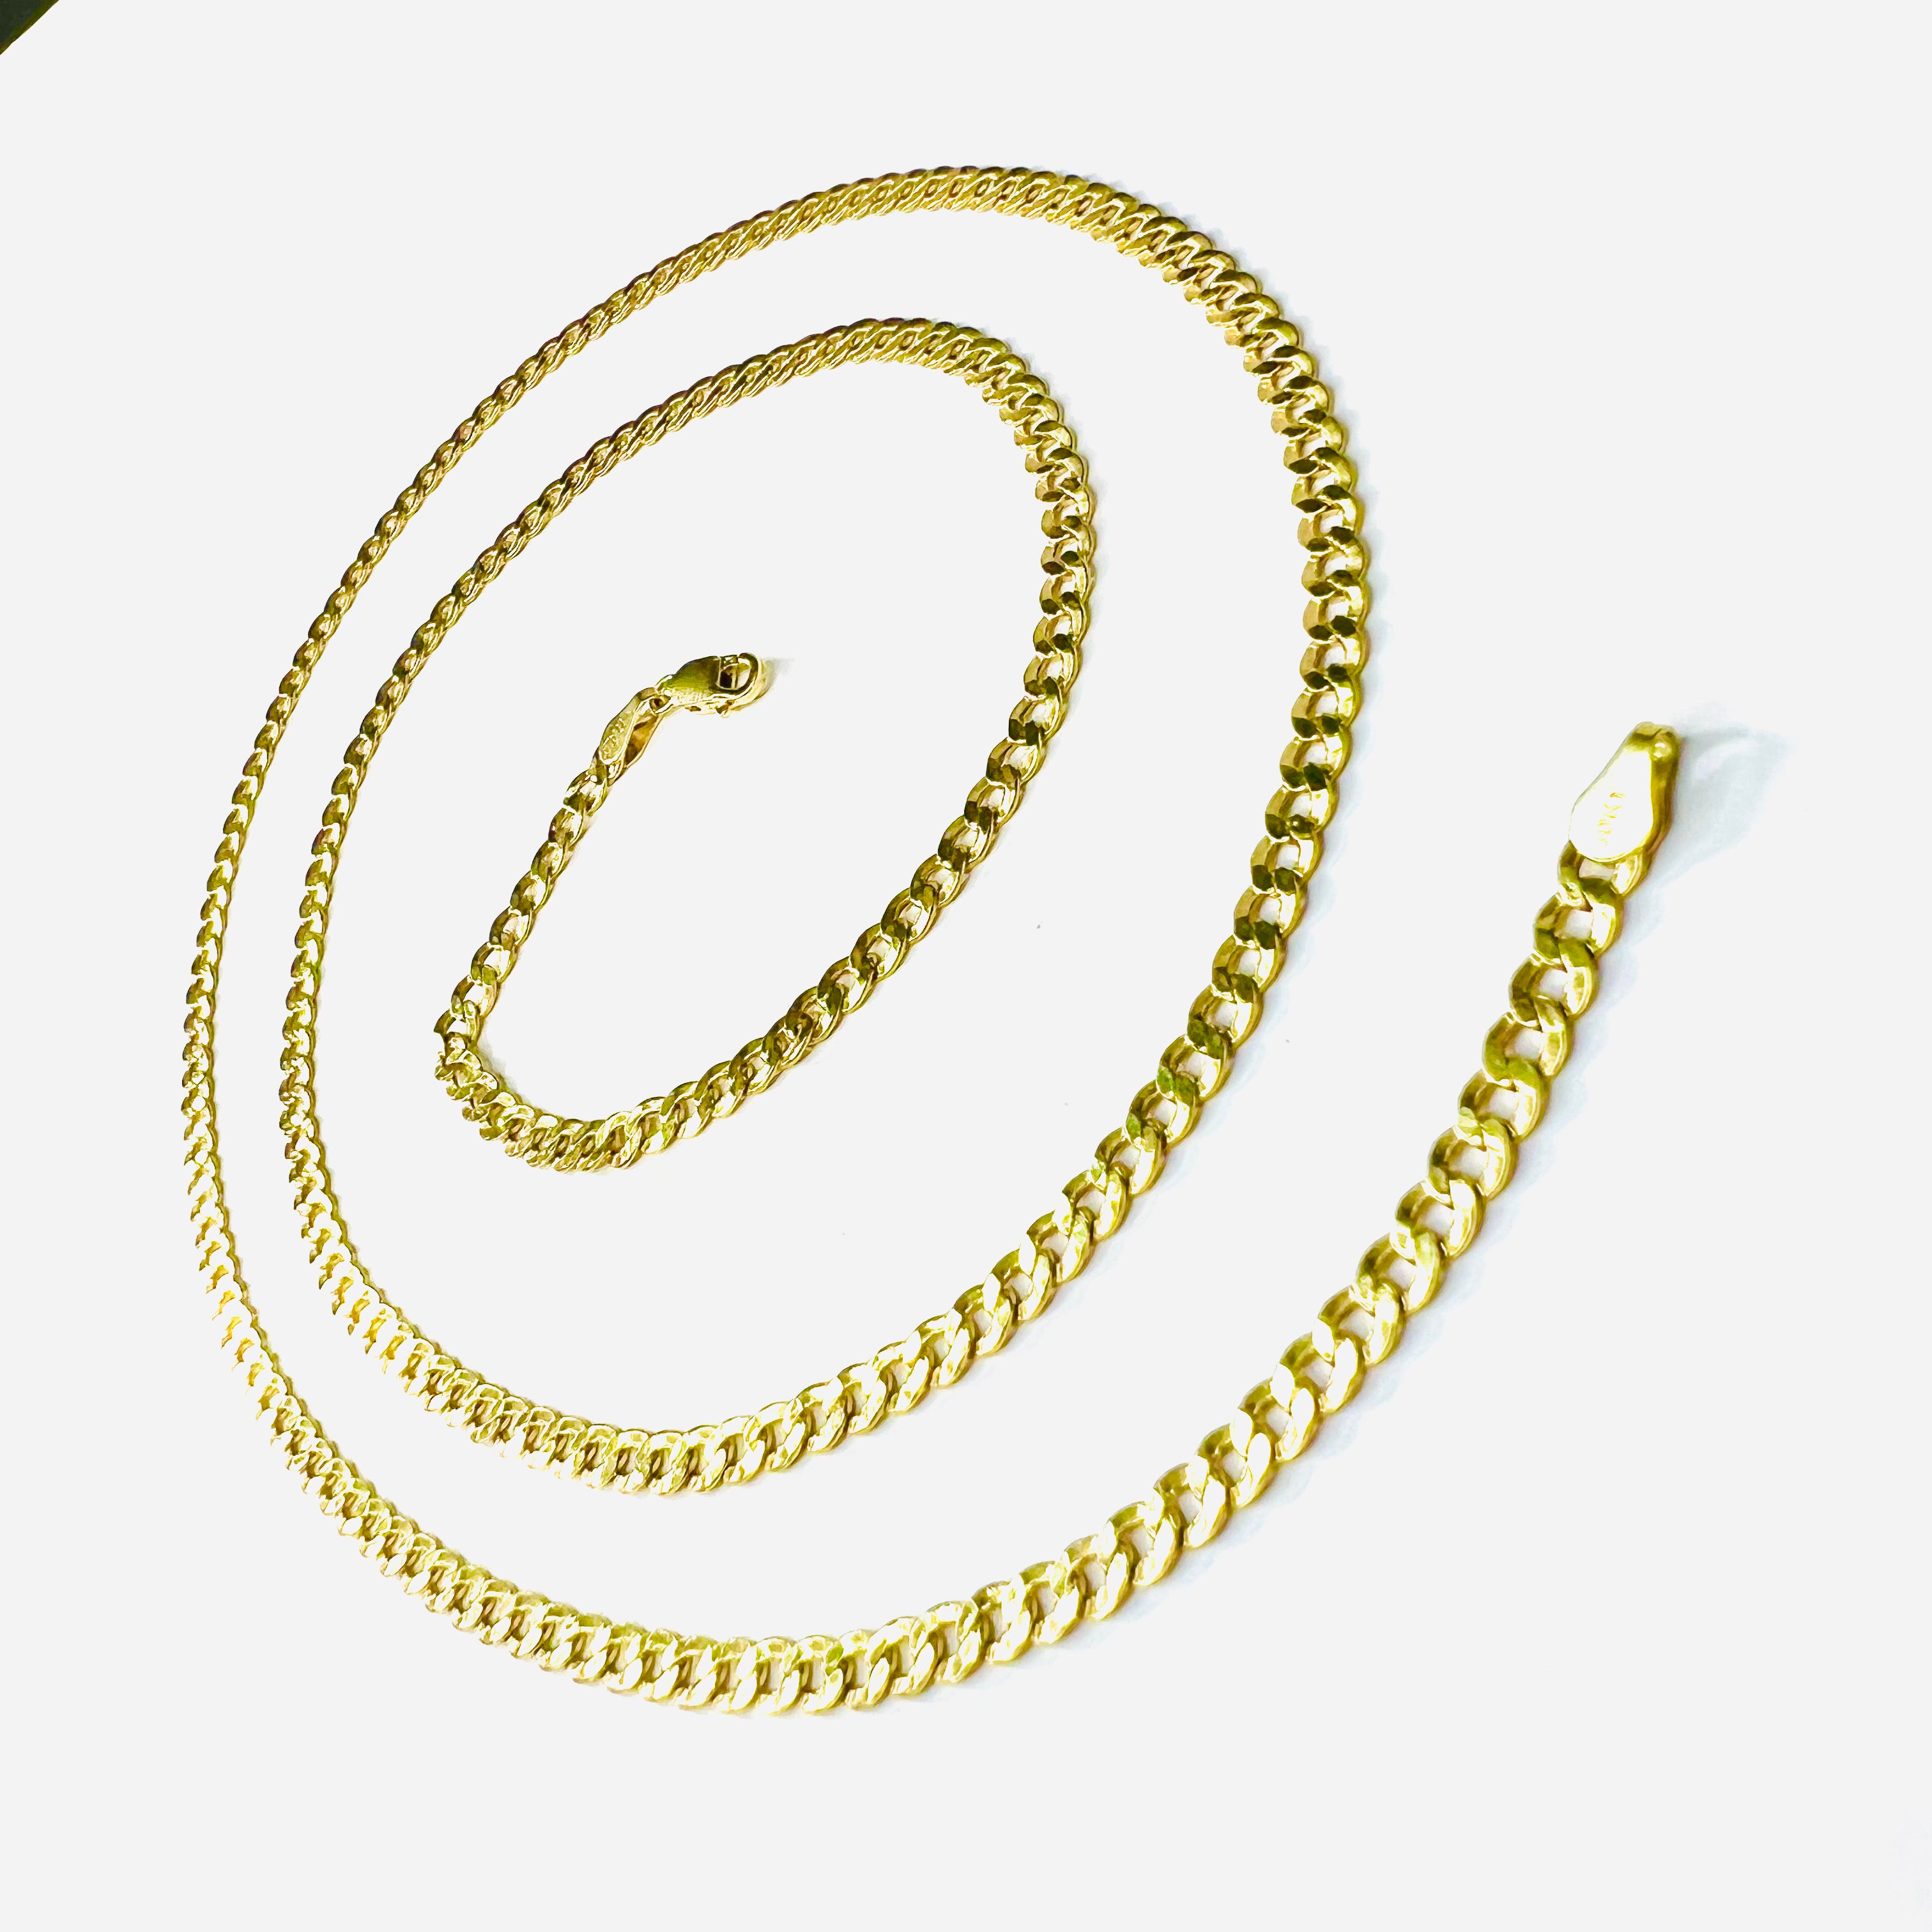 30" 4mm 10K Yellow Gold Cuban Link Chain Necklace